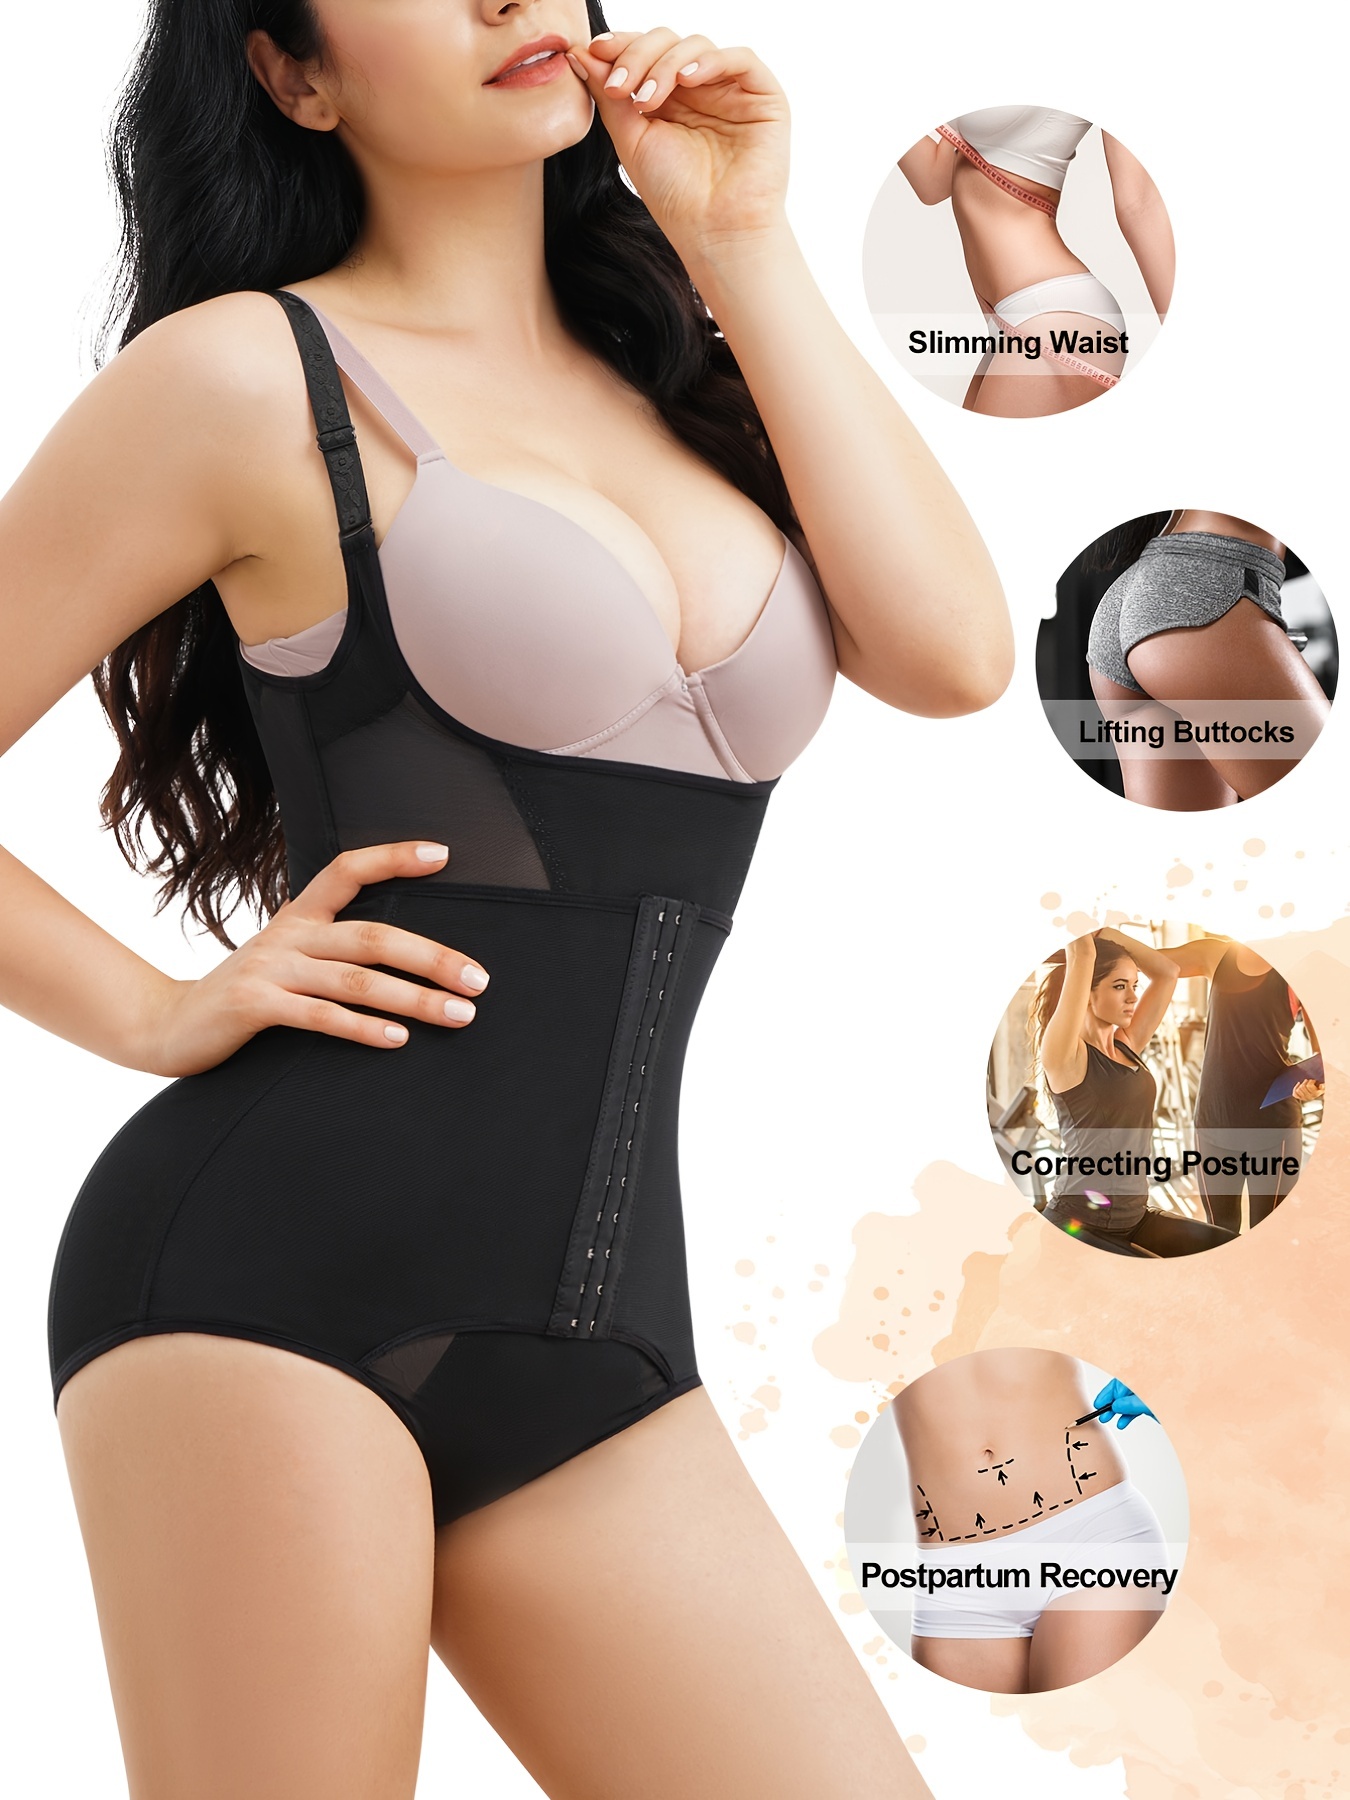 Women Playsuit Casual Body Shapewear Bodysuit Skinny Romper With Cup  Fitness Slimming Shapers Comfortable Stretch Underwear - AliExpress